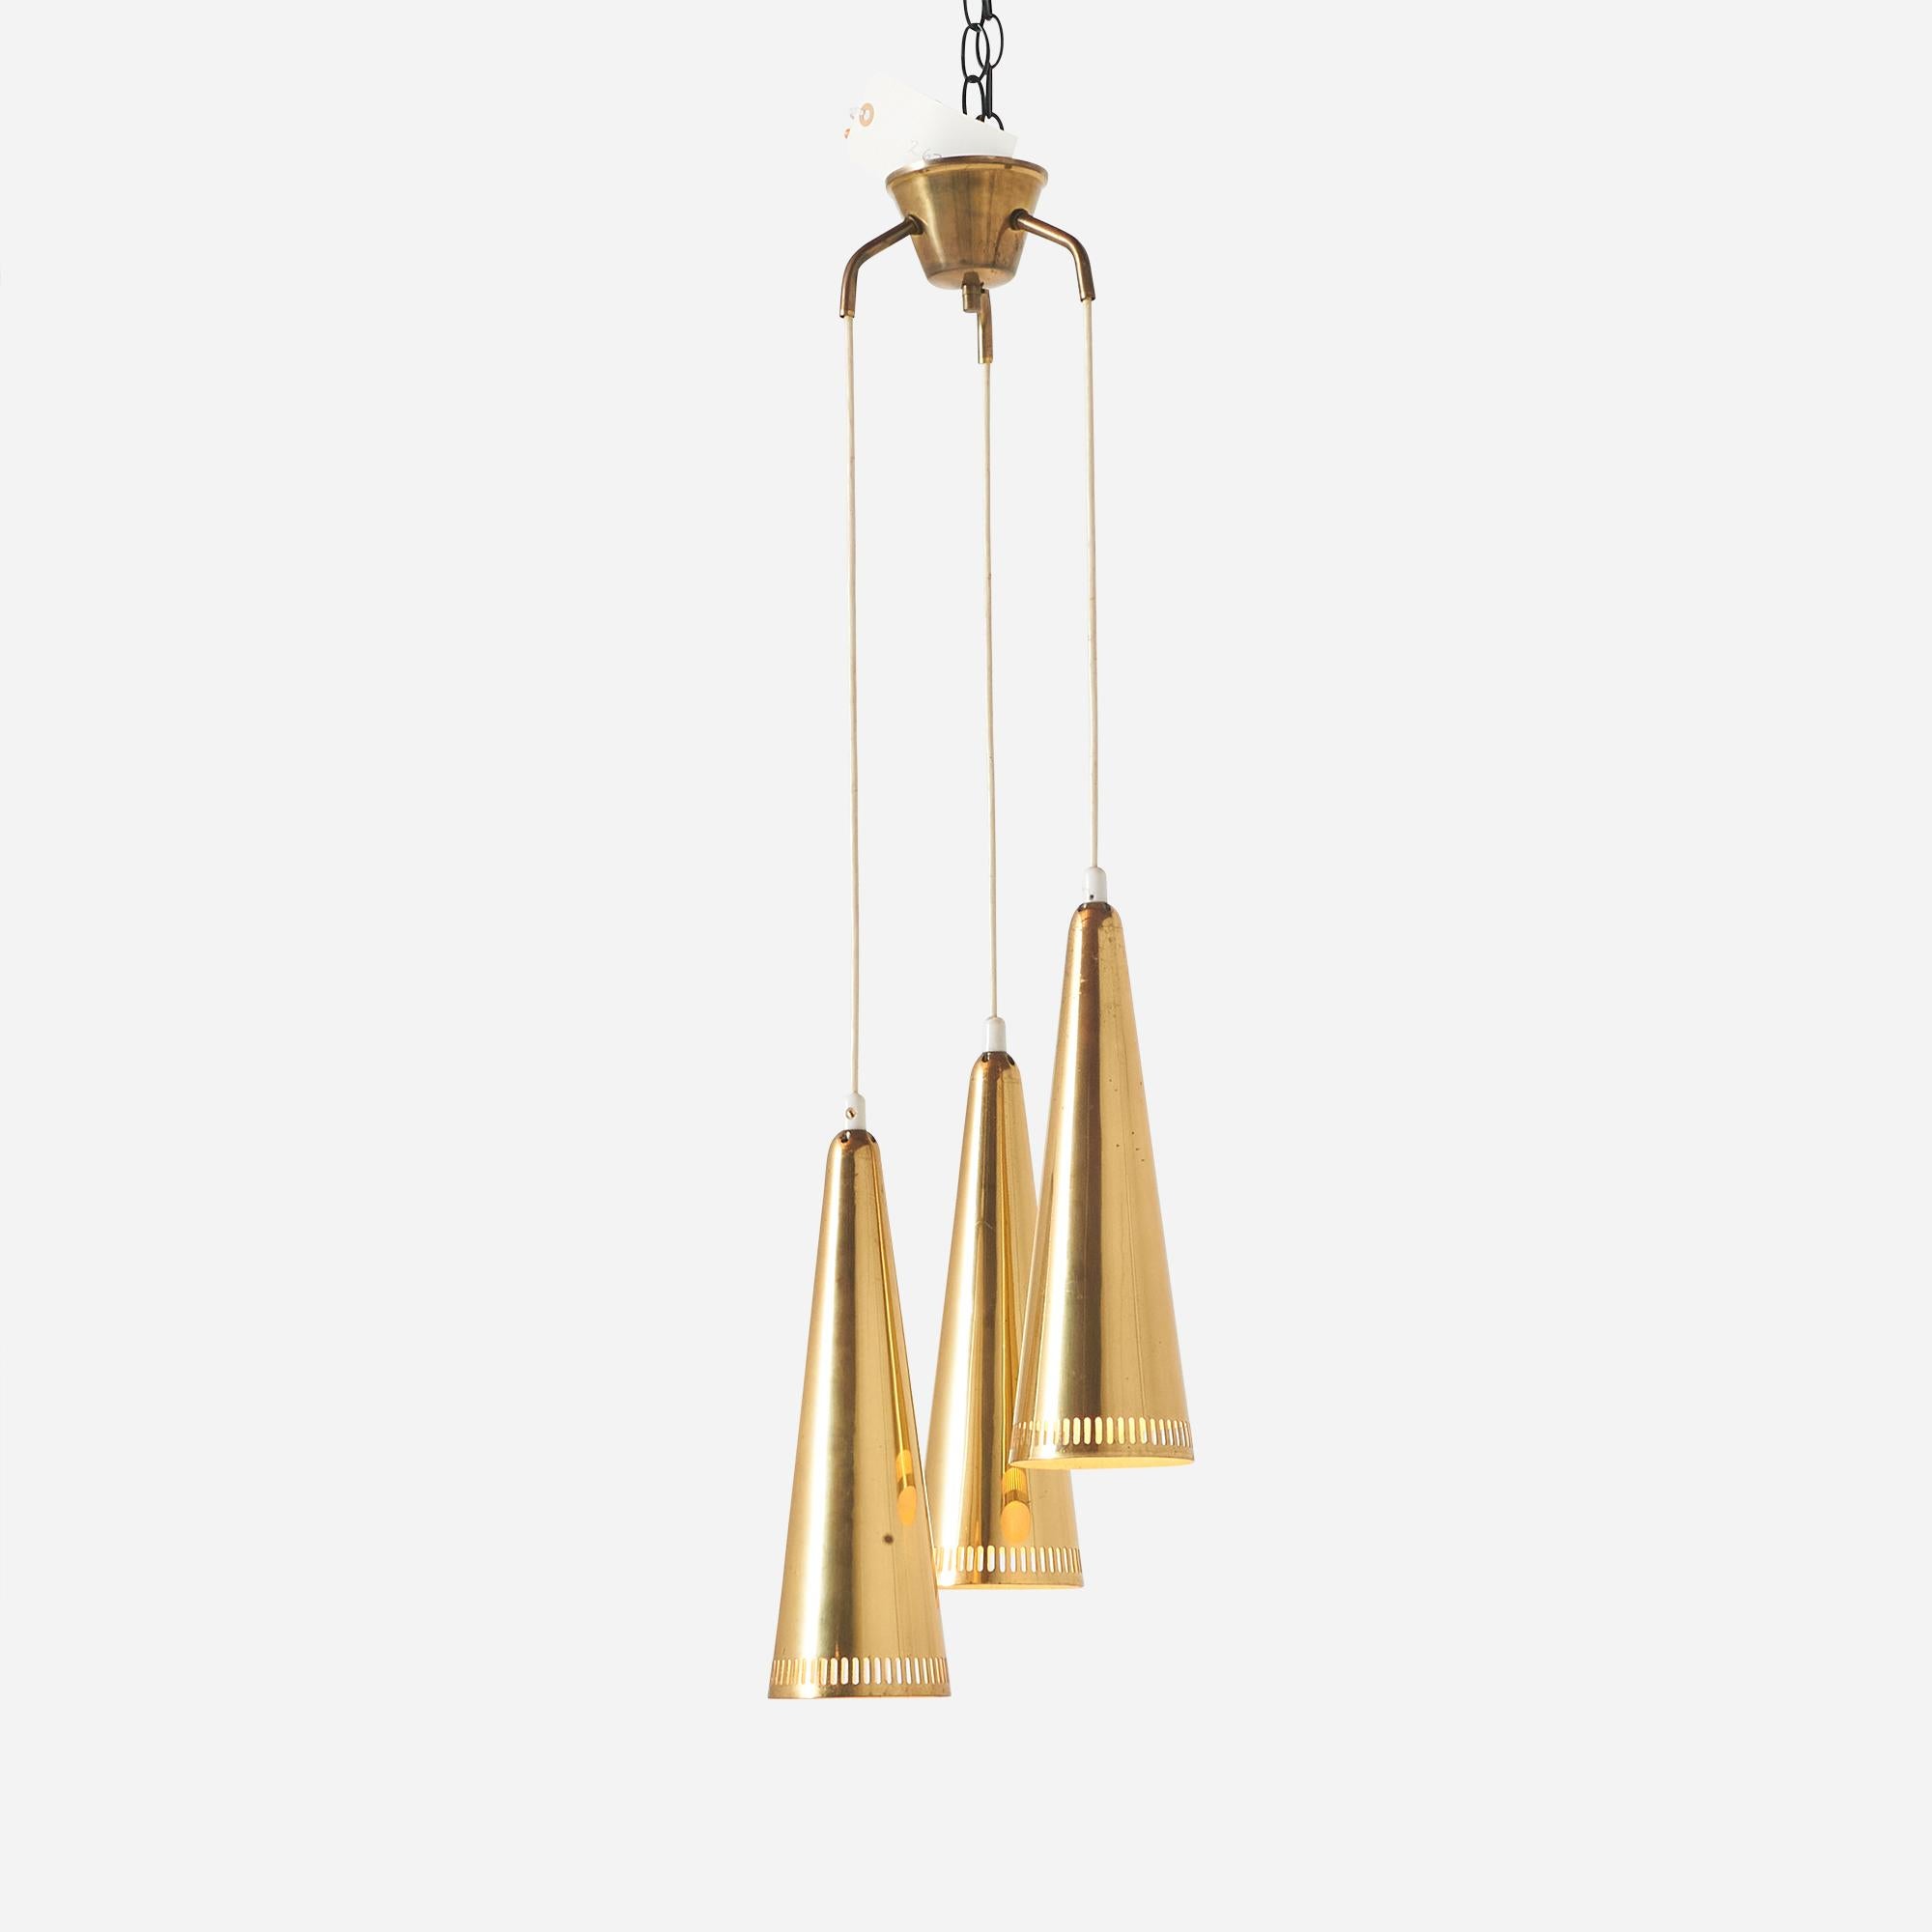 Three shiny brass model 'K2-48' shades, held together by a three-armed brass canopy. Designed by Mauri Almari for Idman, Finland, 1950s. The total drop can be adjusted to your requirements.

Height : 36